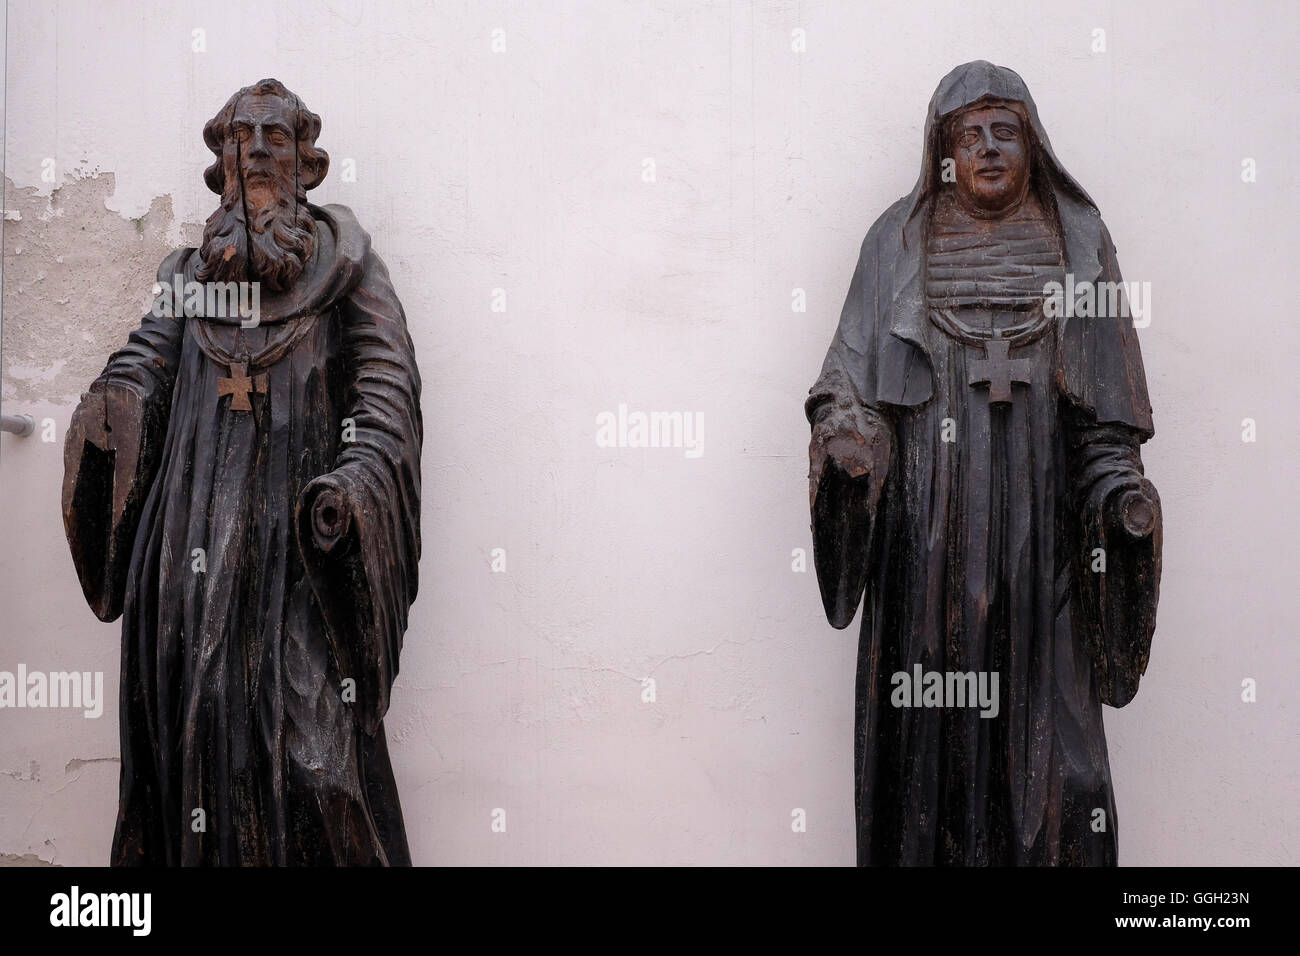 Old wooden figures at the courtyard of St Michael's Church or St. Michael the Archangel Church a former Roman Catholic church now the Church Heritage Museum in the Old Town of Vilnius in Lithuania Stock Photo